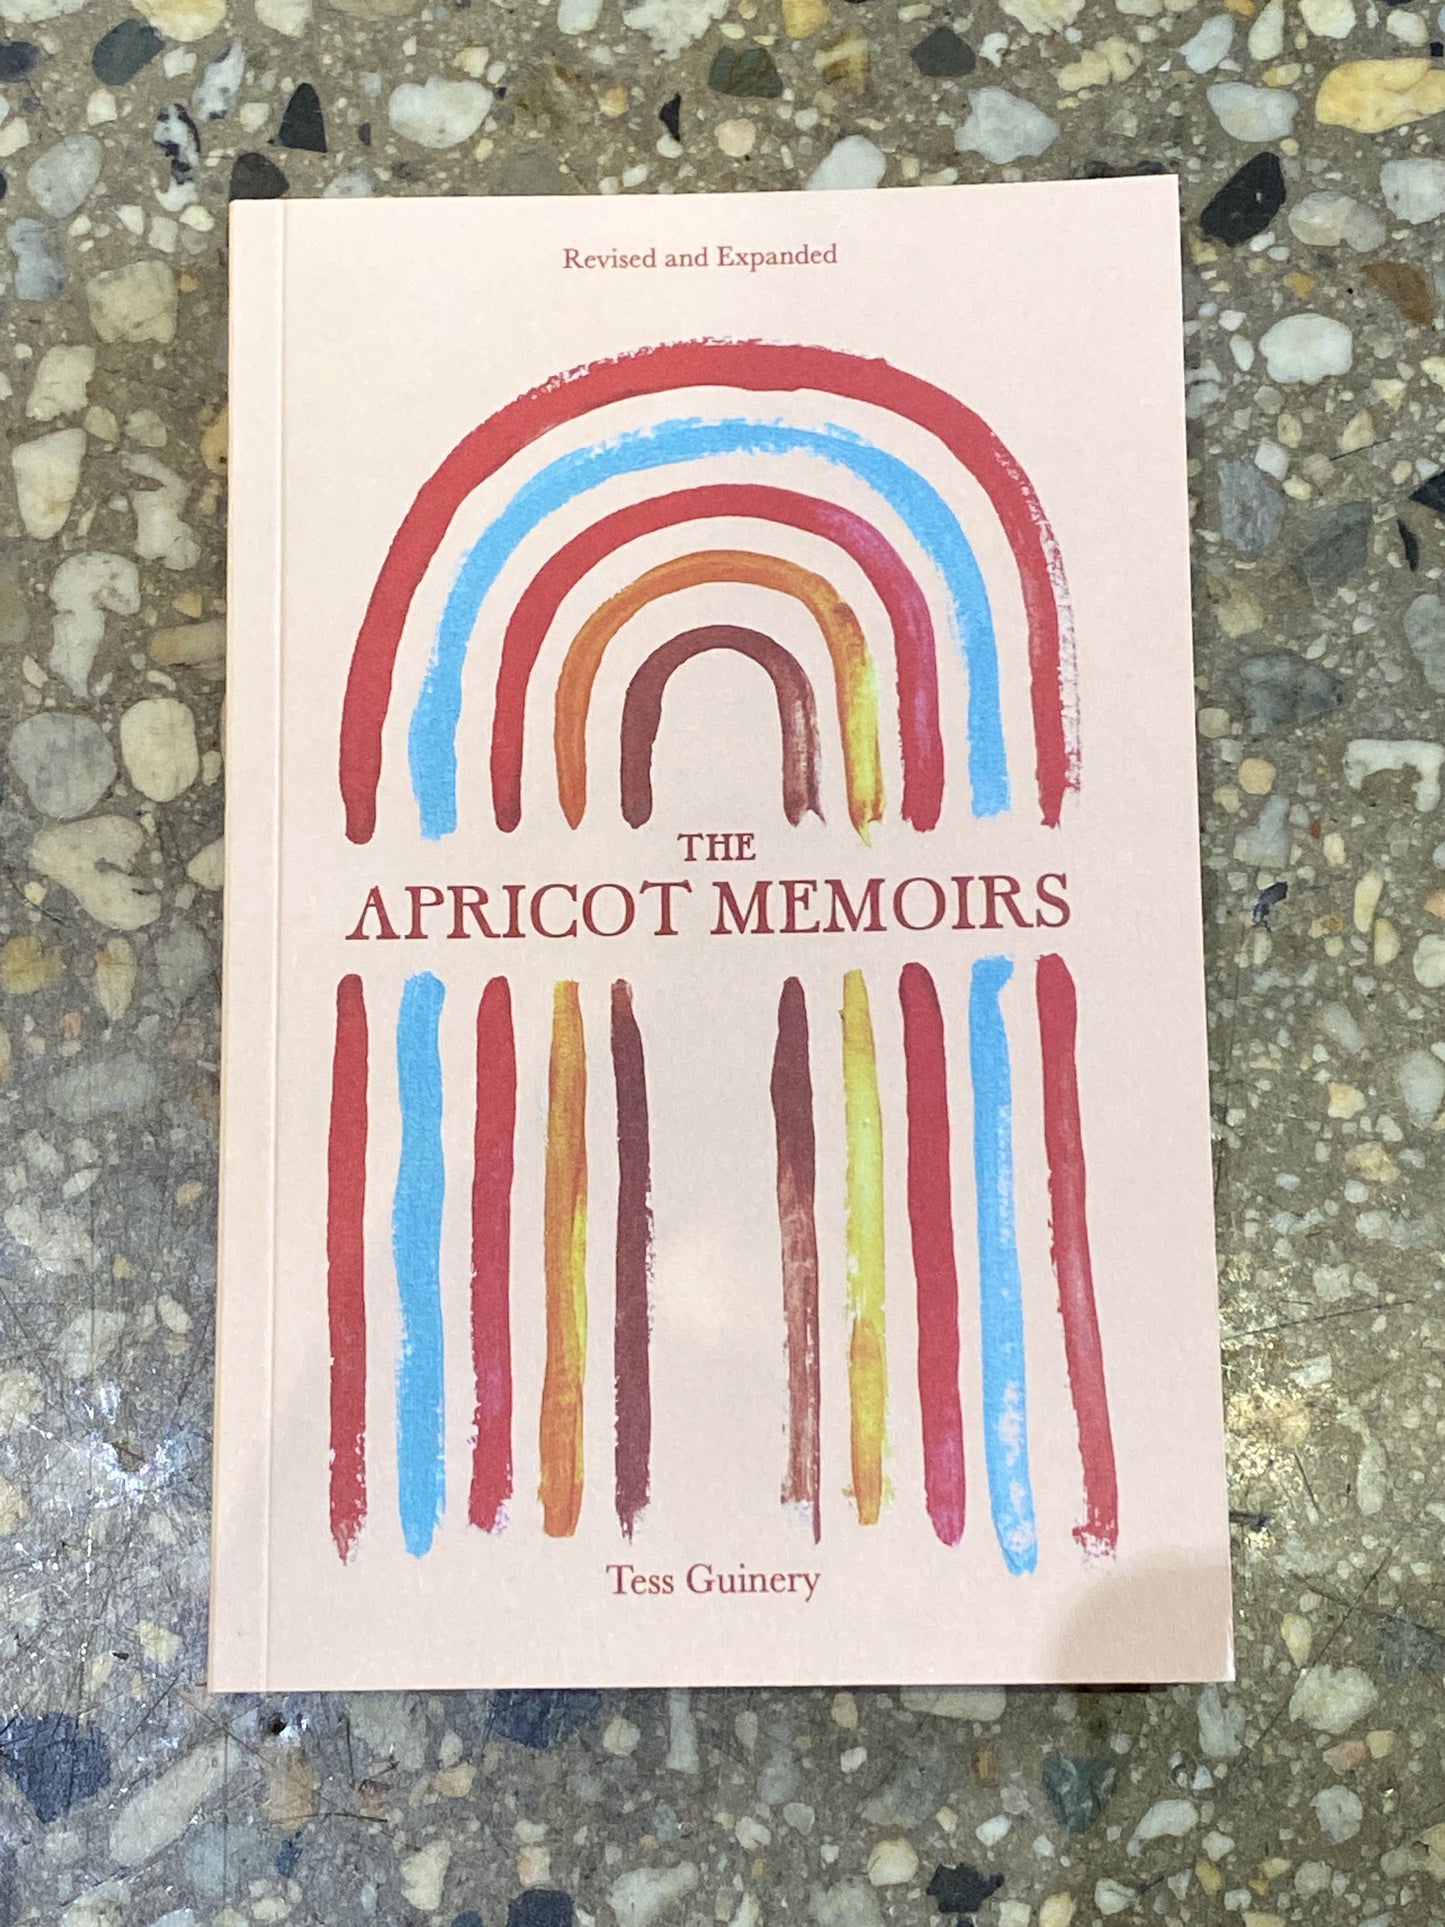 The Apricot Memories